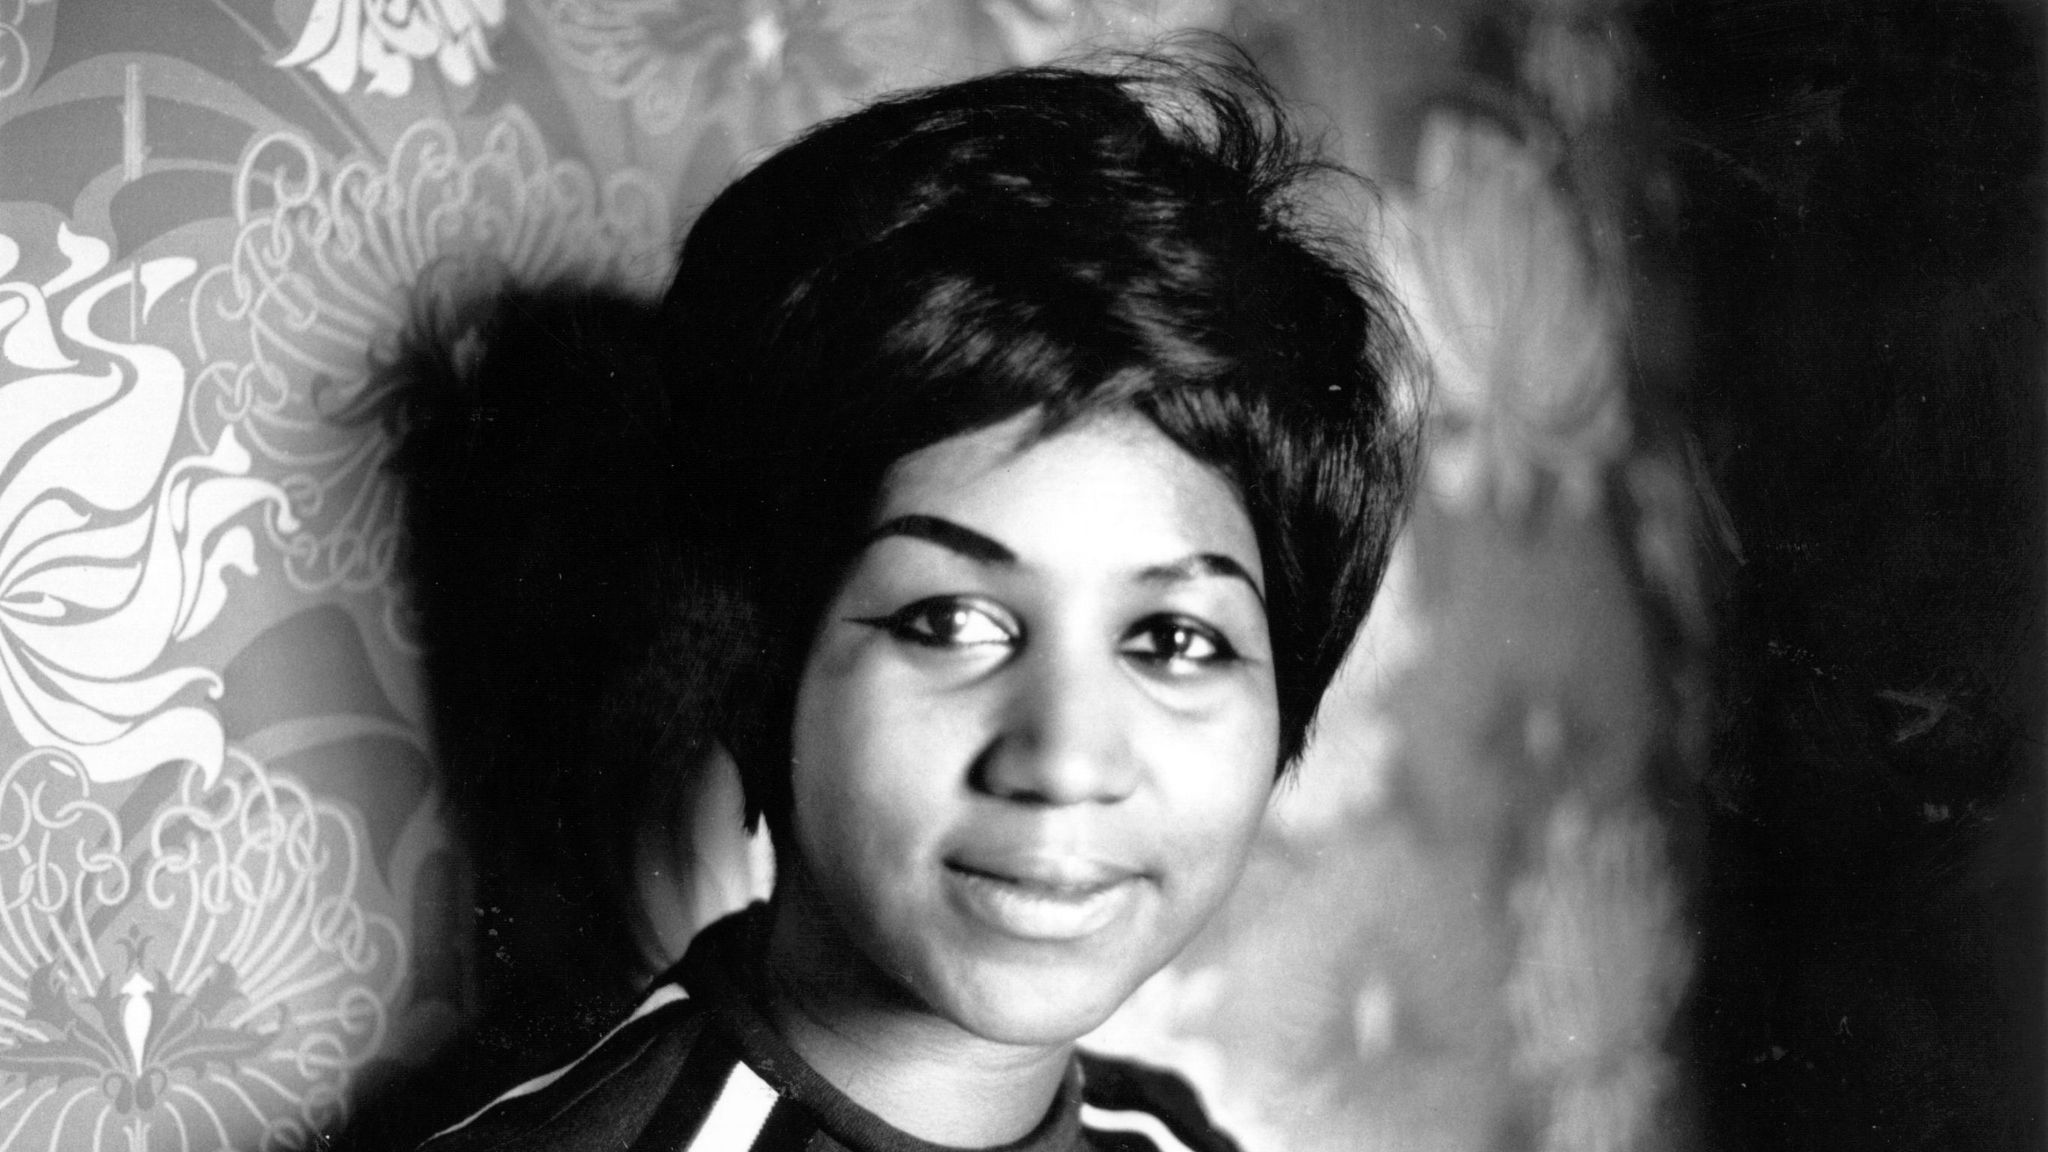 Aretha Franklin Soul Singer Endured Tumultuous Childhood To Conquer The World And Demand Respect Ents Arts News Sky News